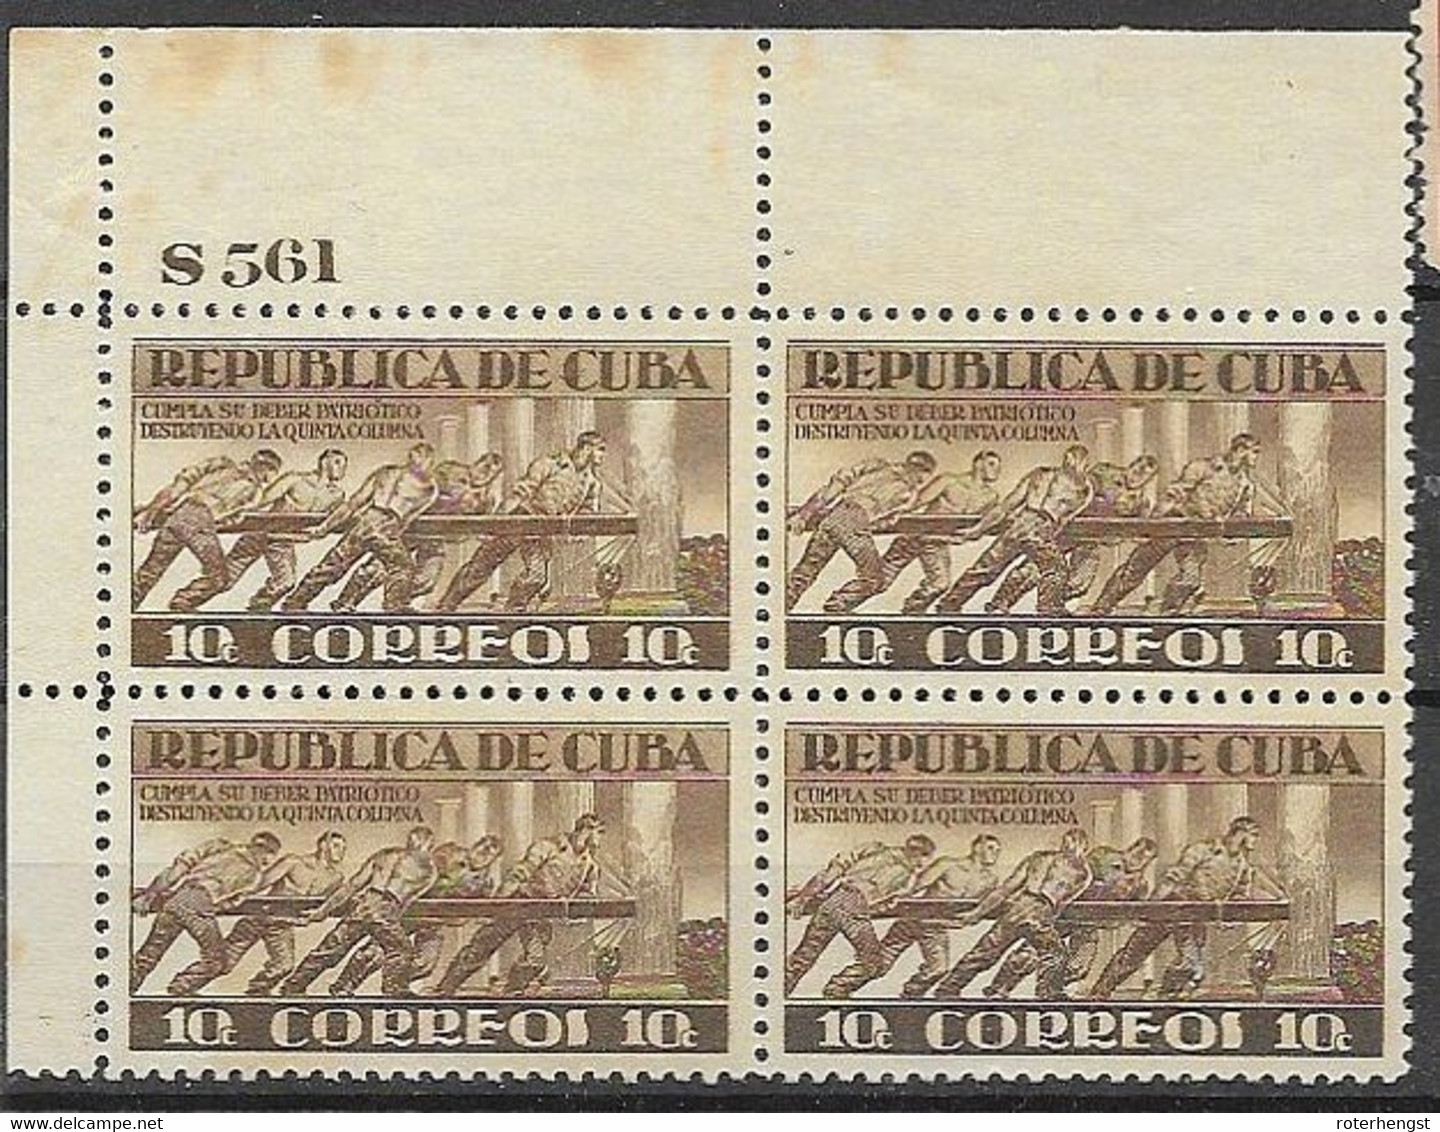 Cuba Mnh ** With Plate Number (stain Only On Border, Stamps Fine) 1943 About 30 Euros - Ungebraucht